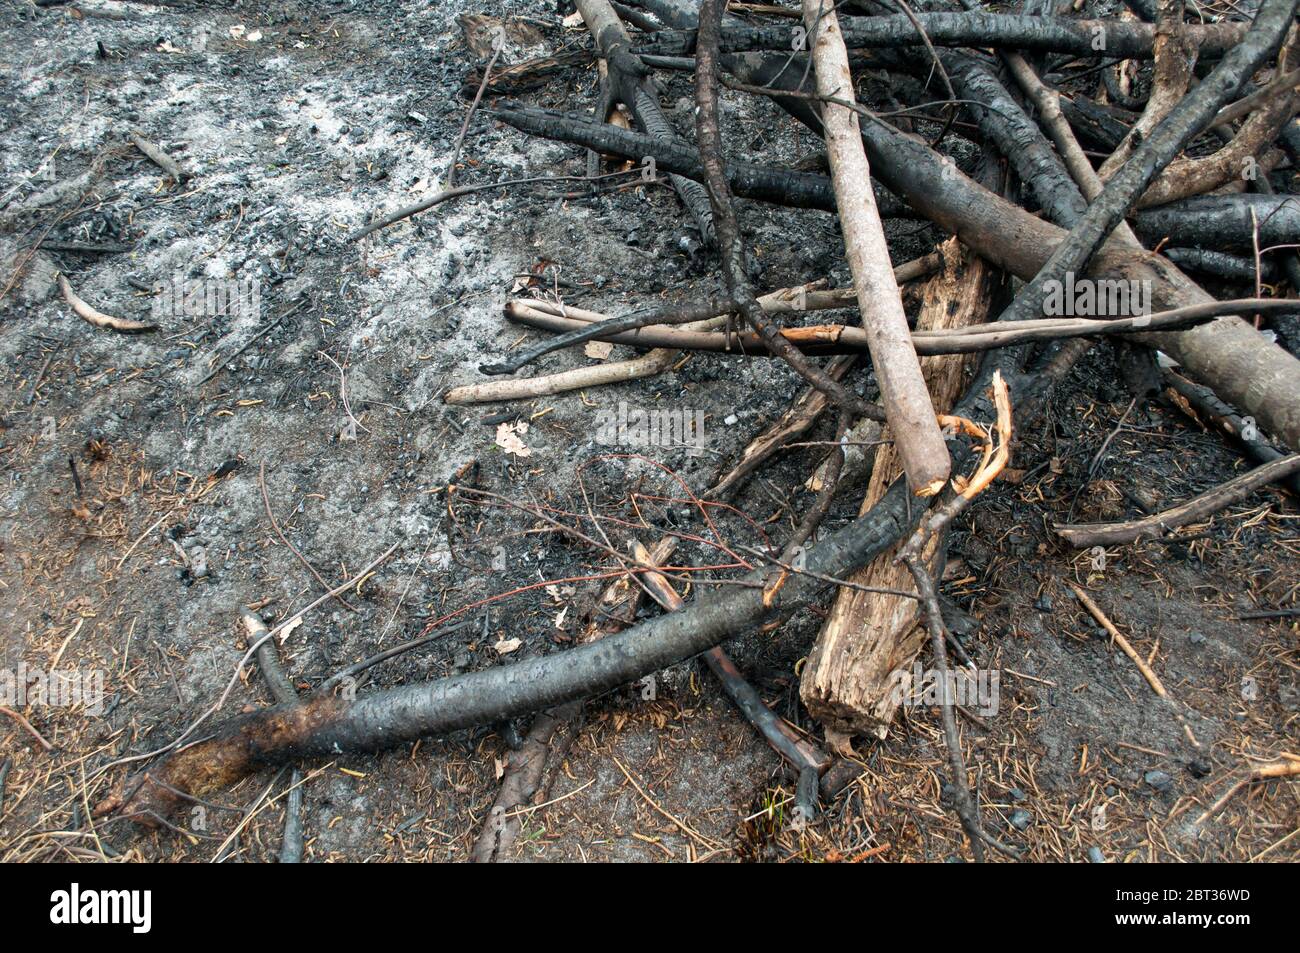 Pile of burnt branches after a forest fire, consequence of the forest fire.The result of human careless contact with nature. Stock Photo